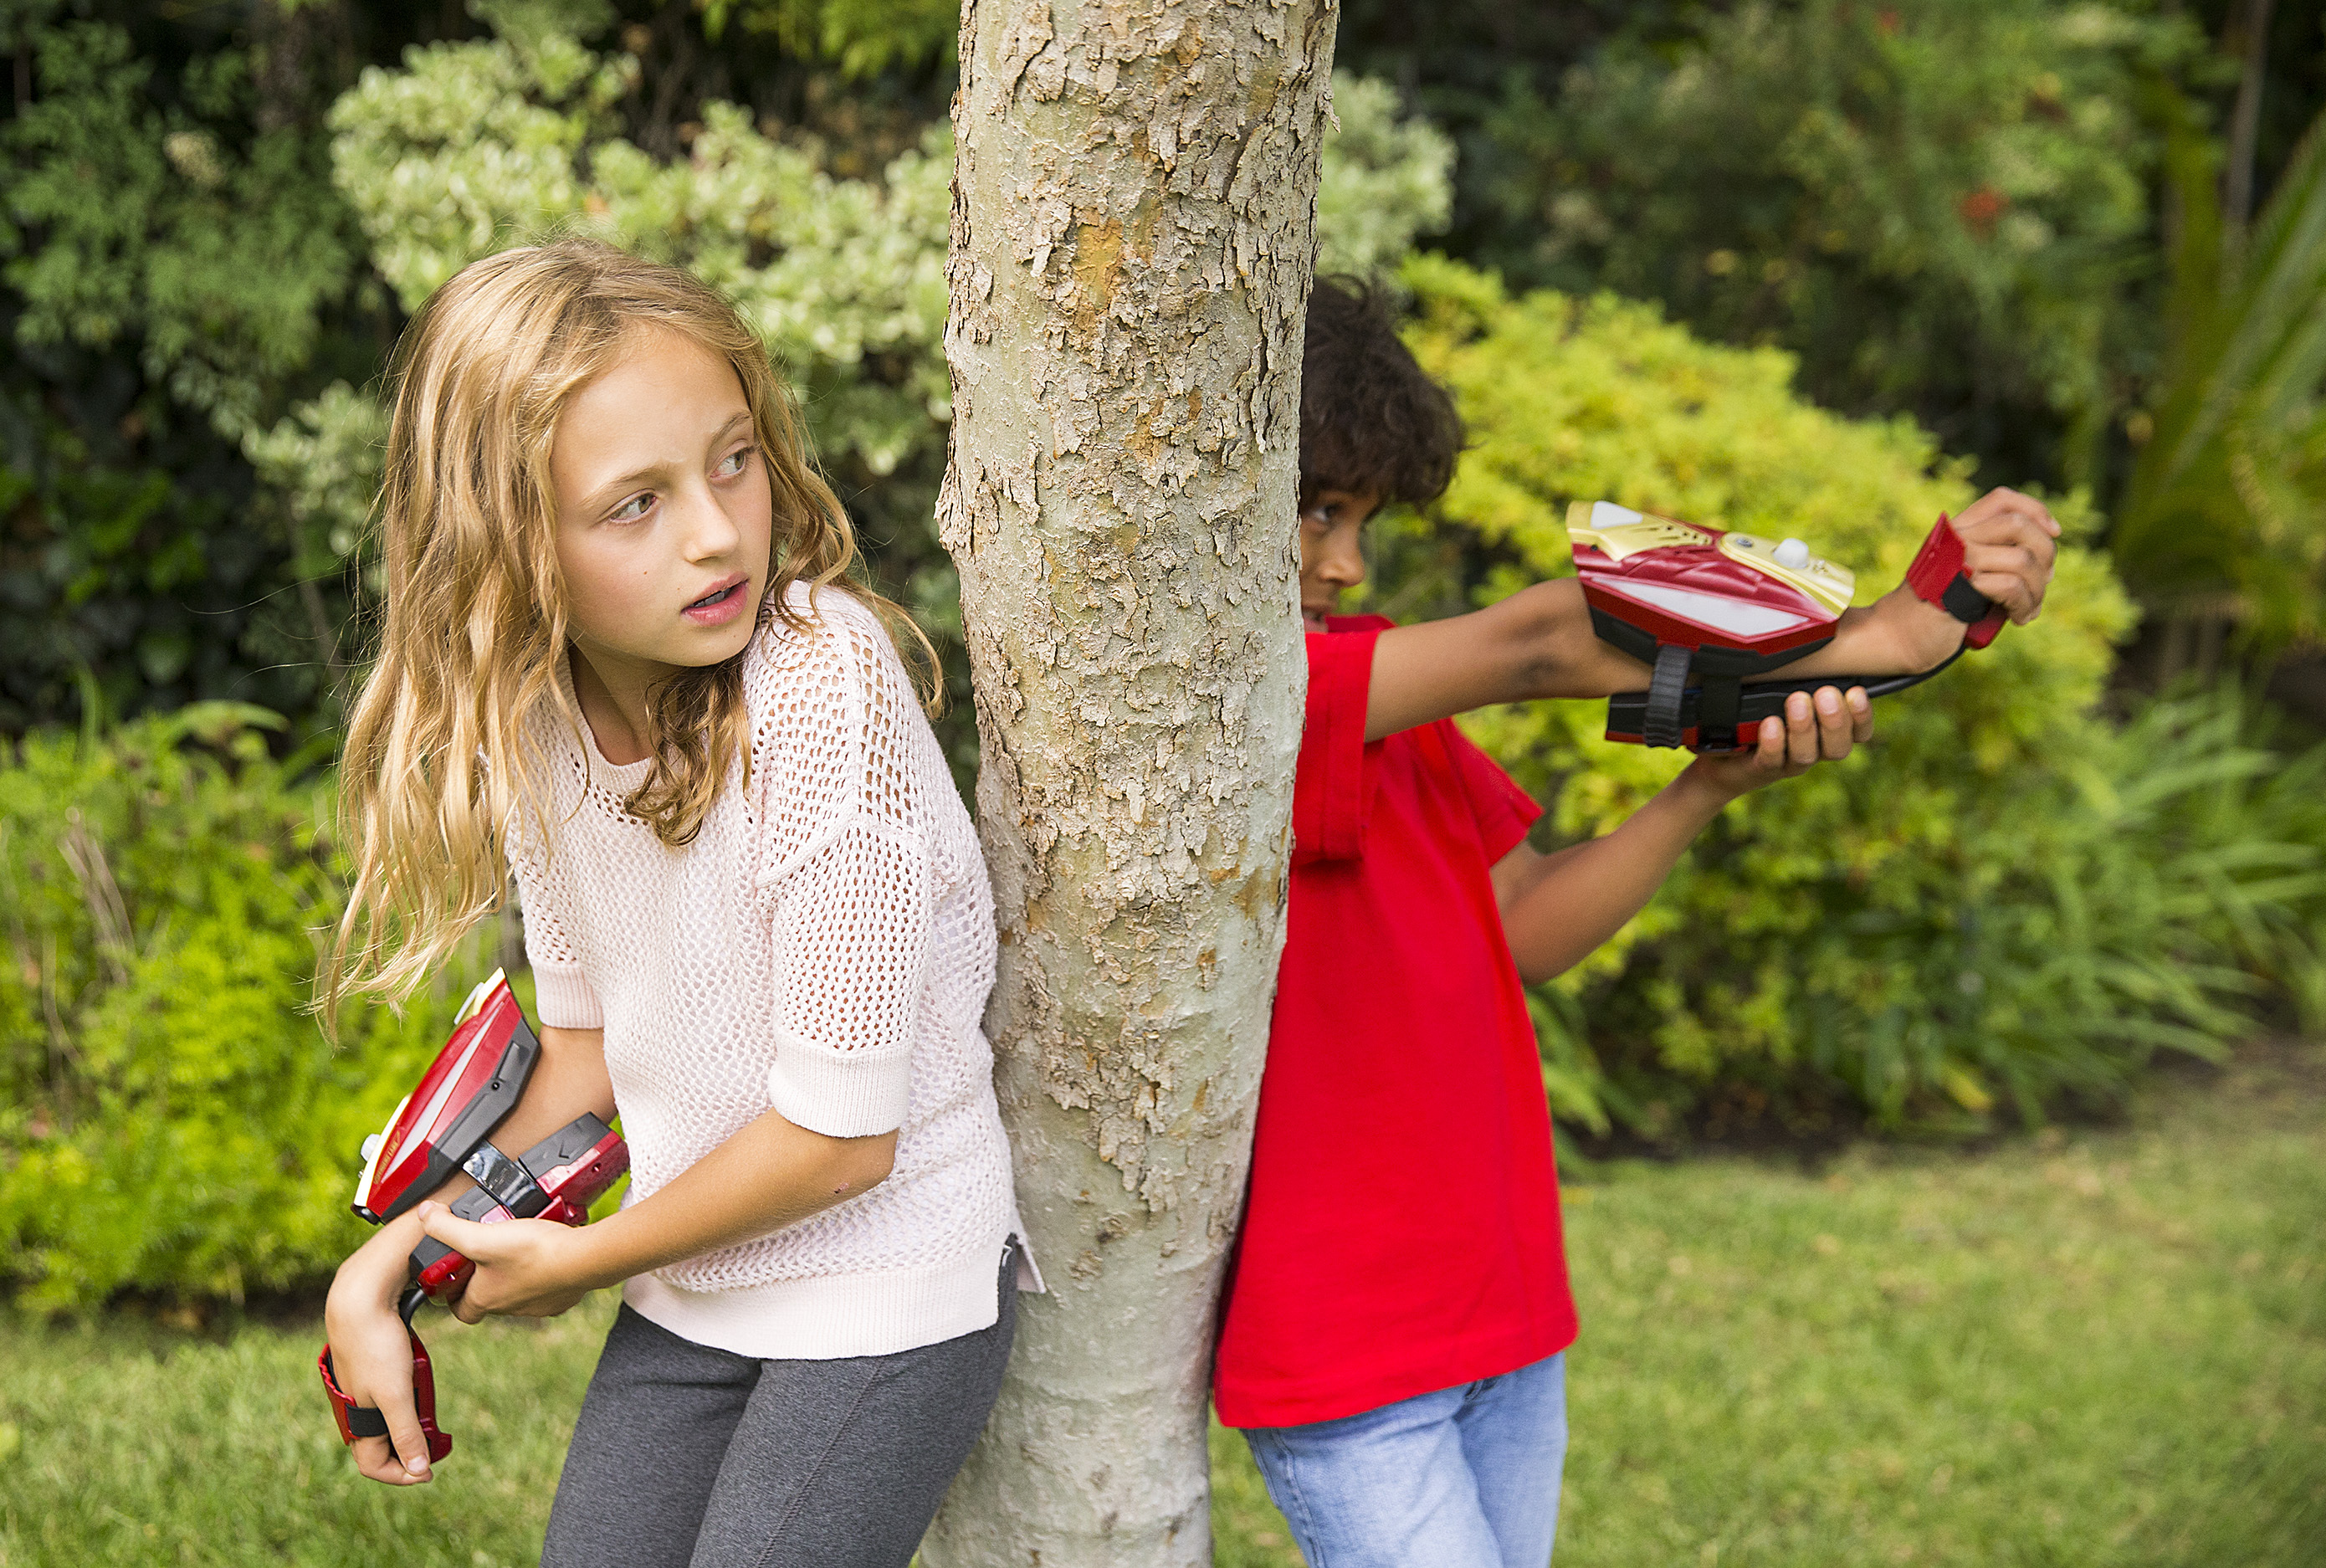 “Playmation” Might Get Video Game Lovers Outside